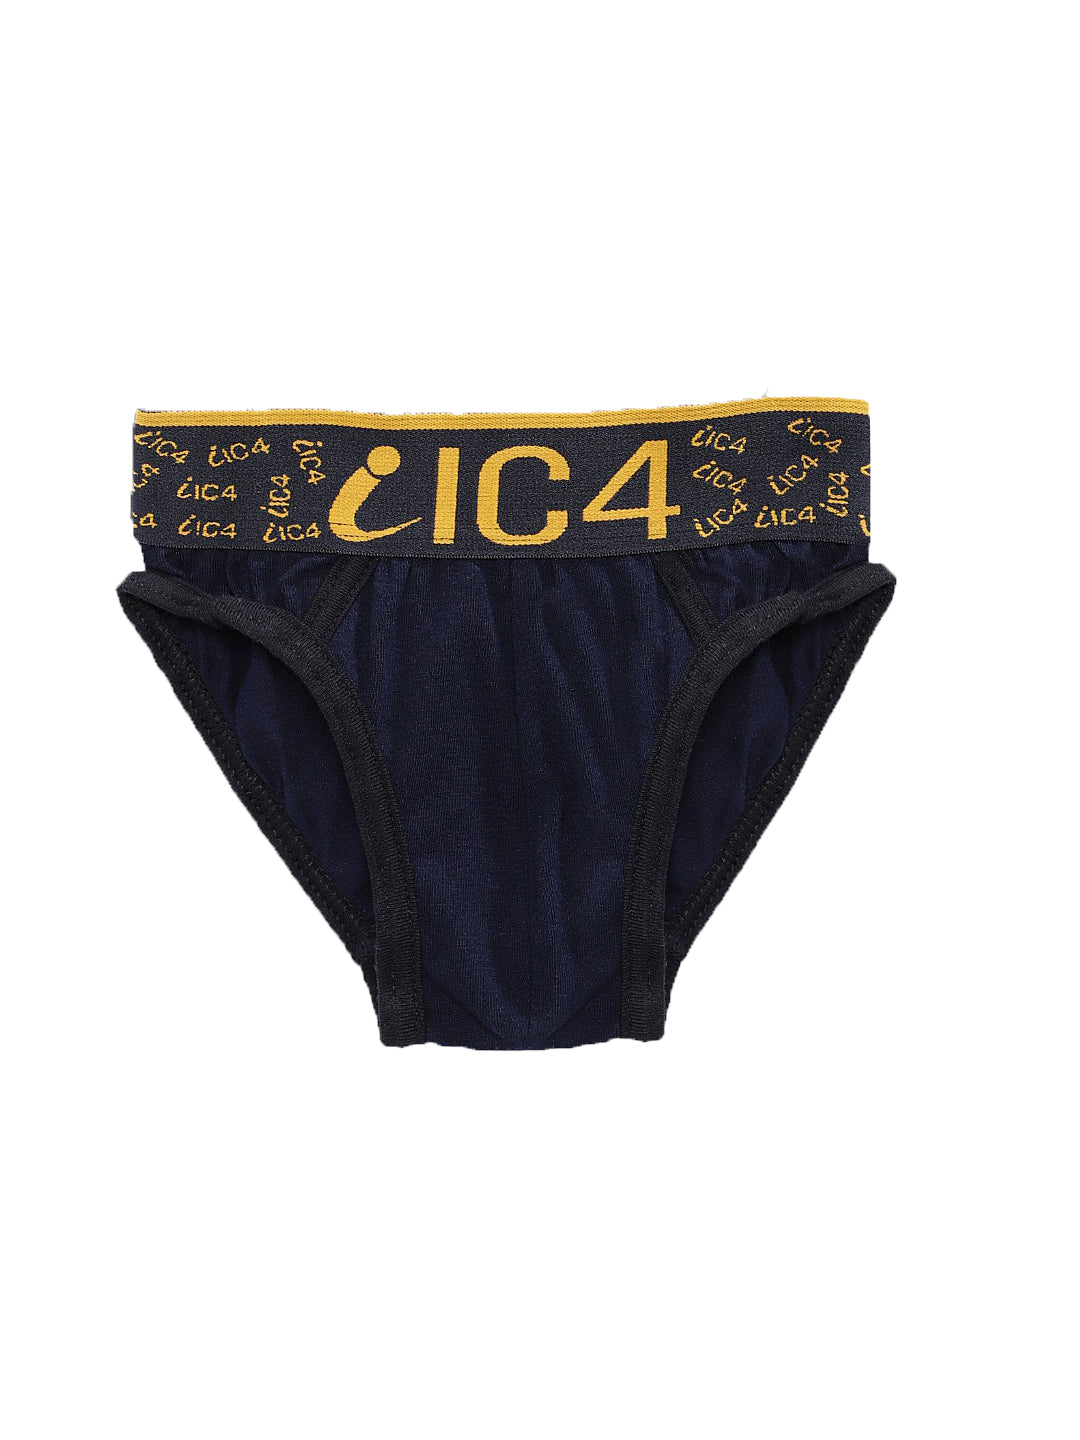 IC4 Boys Brief Navy Combo Pack of 3